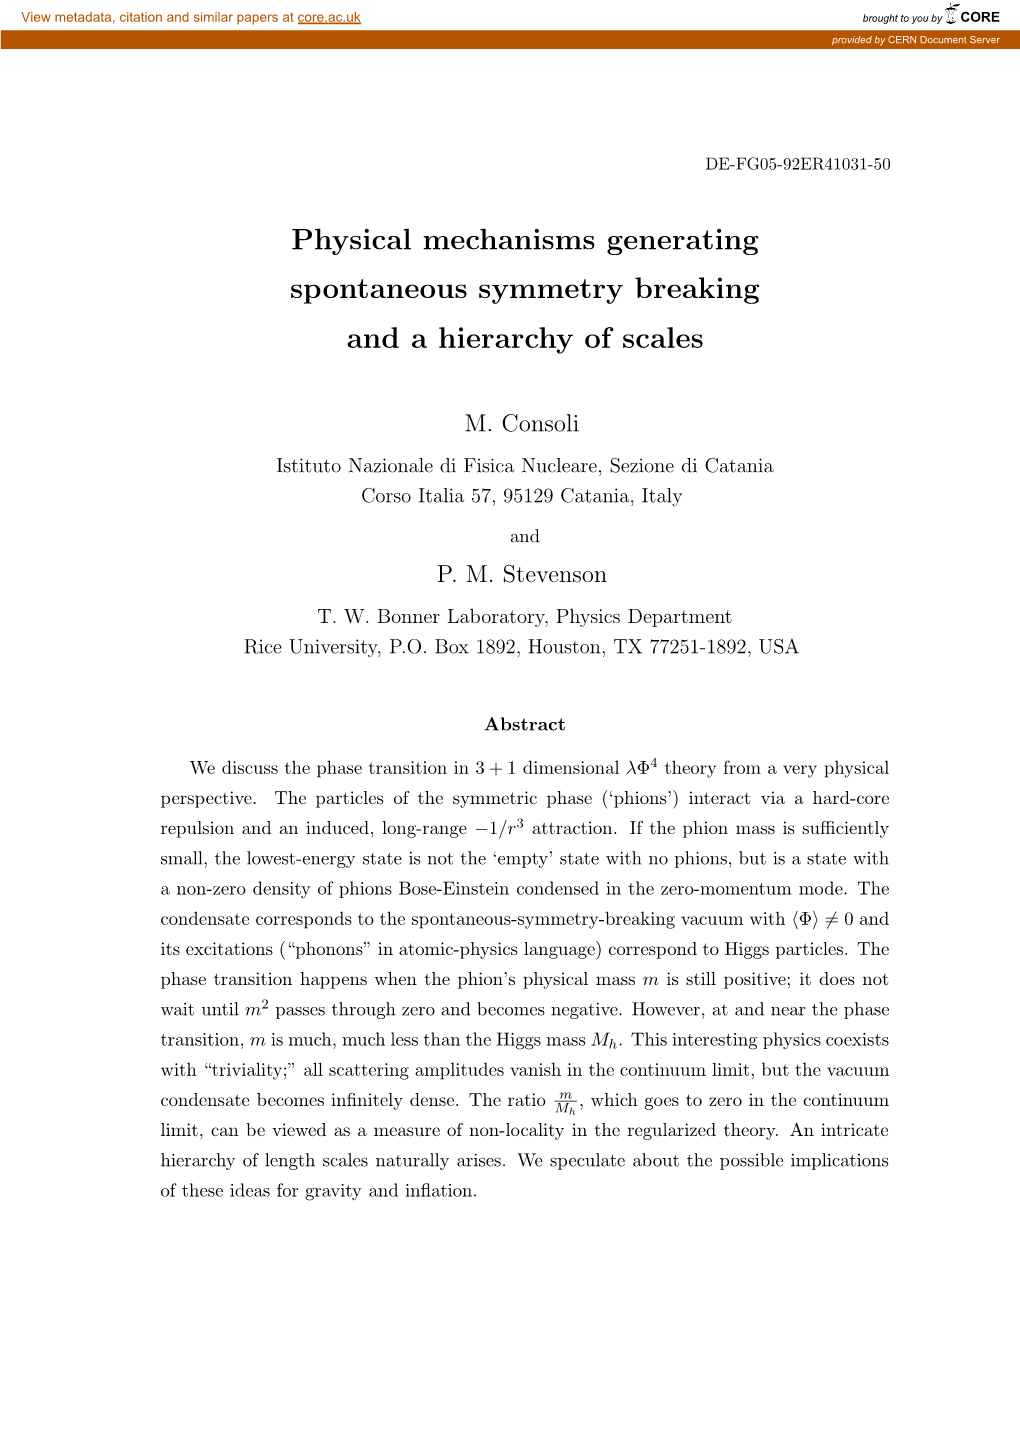 Physical Mechanisms Generating Spontaneous Symmetry Breaking and a Hierarchy of Scales